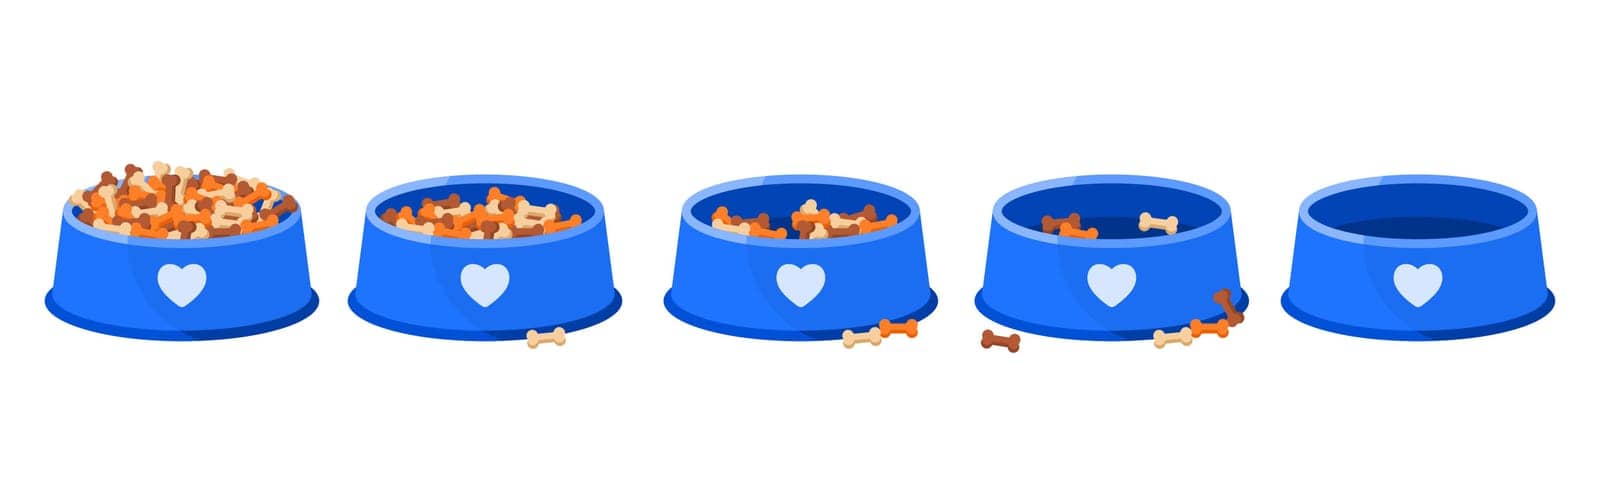 Pet dry food eating set, sequence game animation of eaten dogs treats. Animated steps collection of bowl with bone biscuit pile, plastic container half full and empty plate cartoon vector illustration